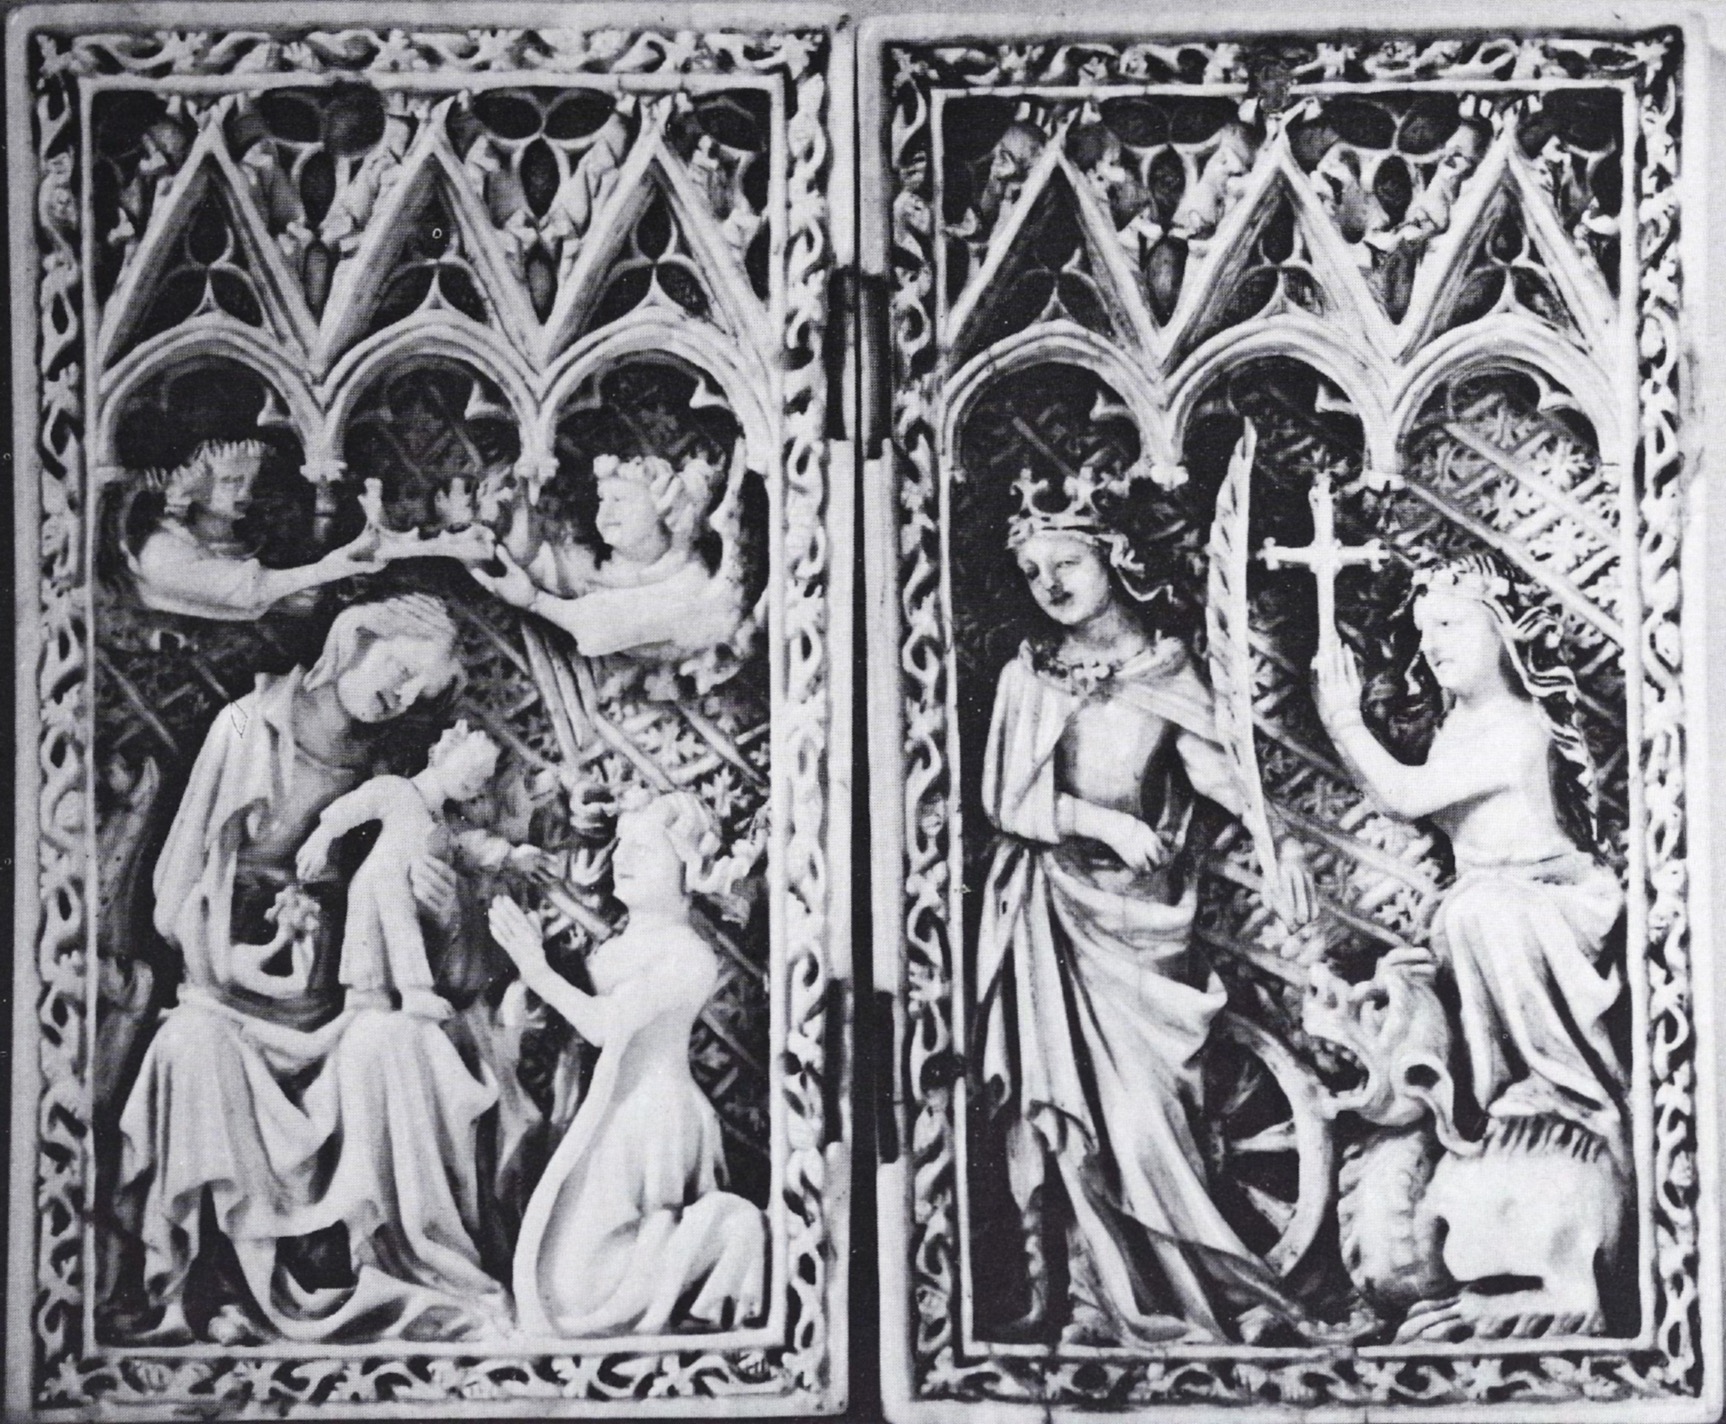 On a carved ivory diptych, a figure kneeling before a child on a woman’s lap, a woman standing next to a wheel and holding a palm branch, and a woman standing with one foot on a dragon and holding a cross.